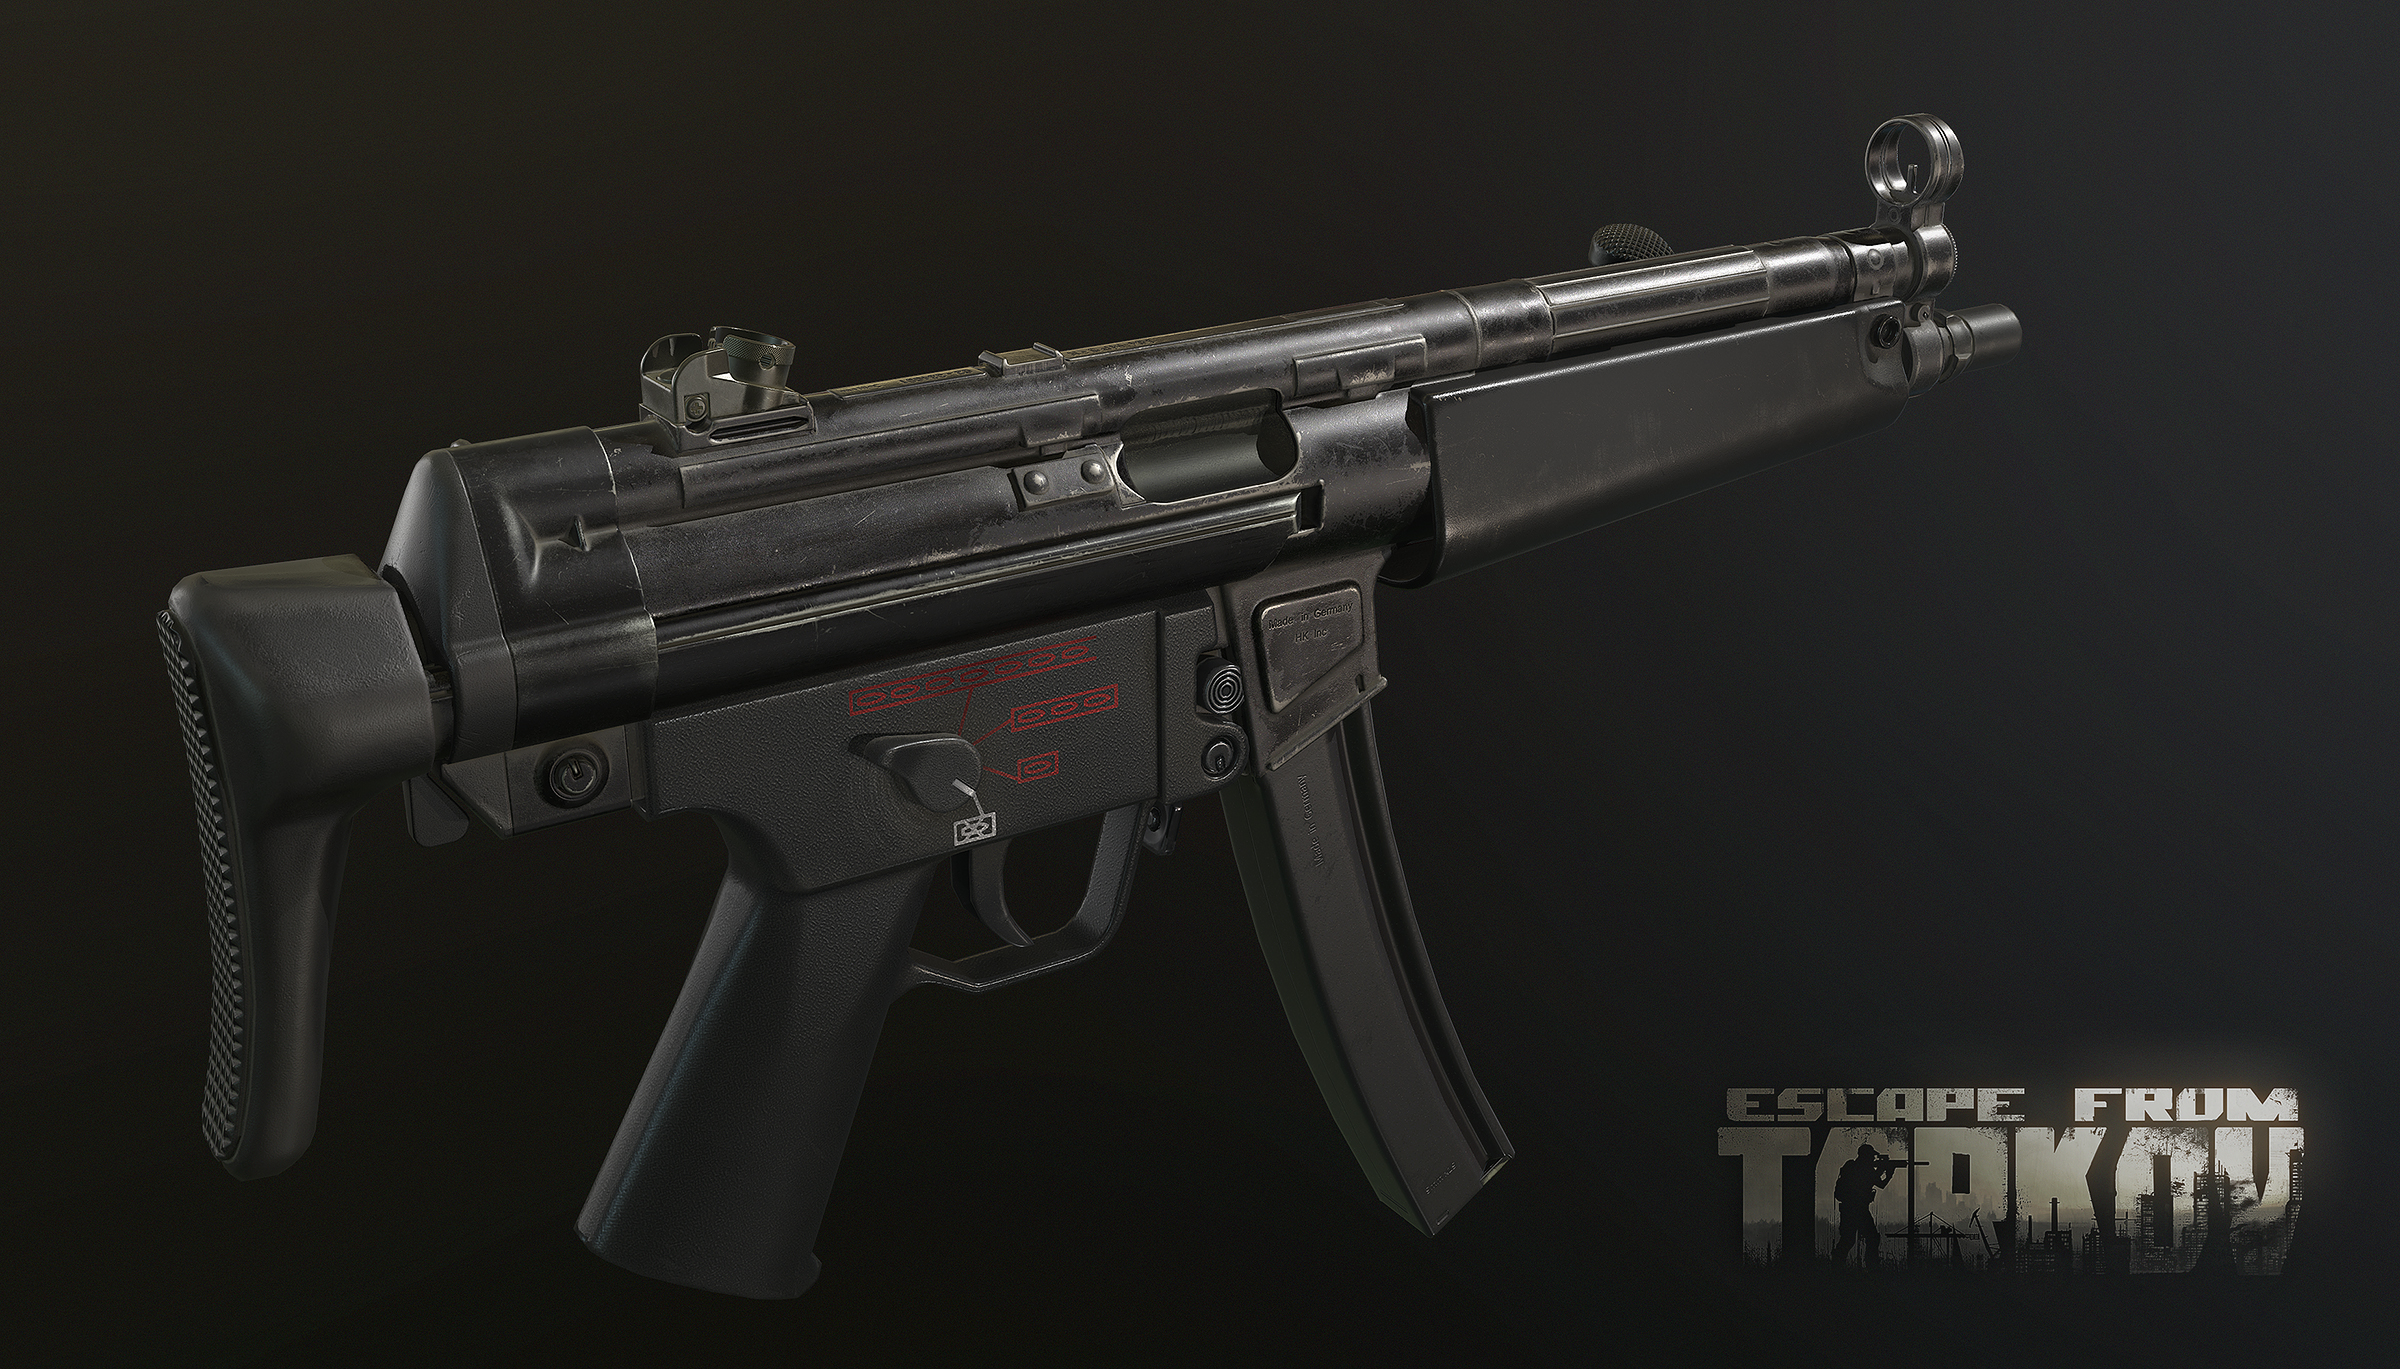 Escape from Tarkov Screenshots of HK MP5 SMG and its variants in Escape from Tarkov - 5